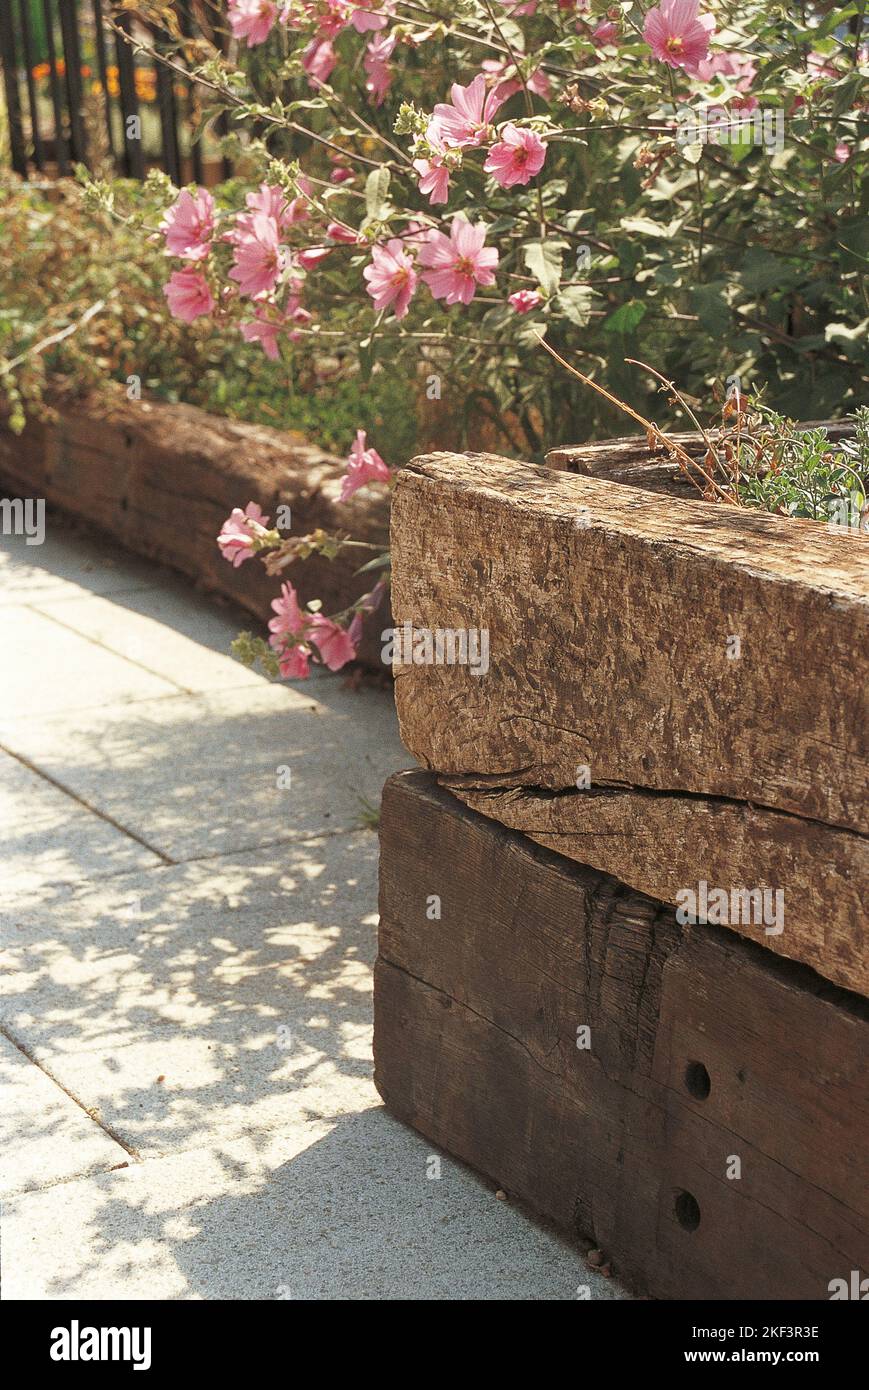 A garden border wall made from old wooden boards Stock Photo